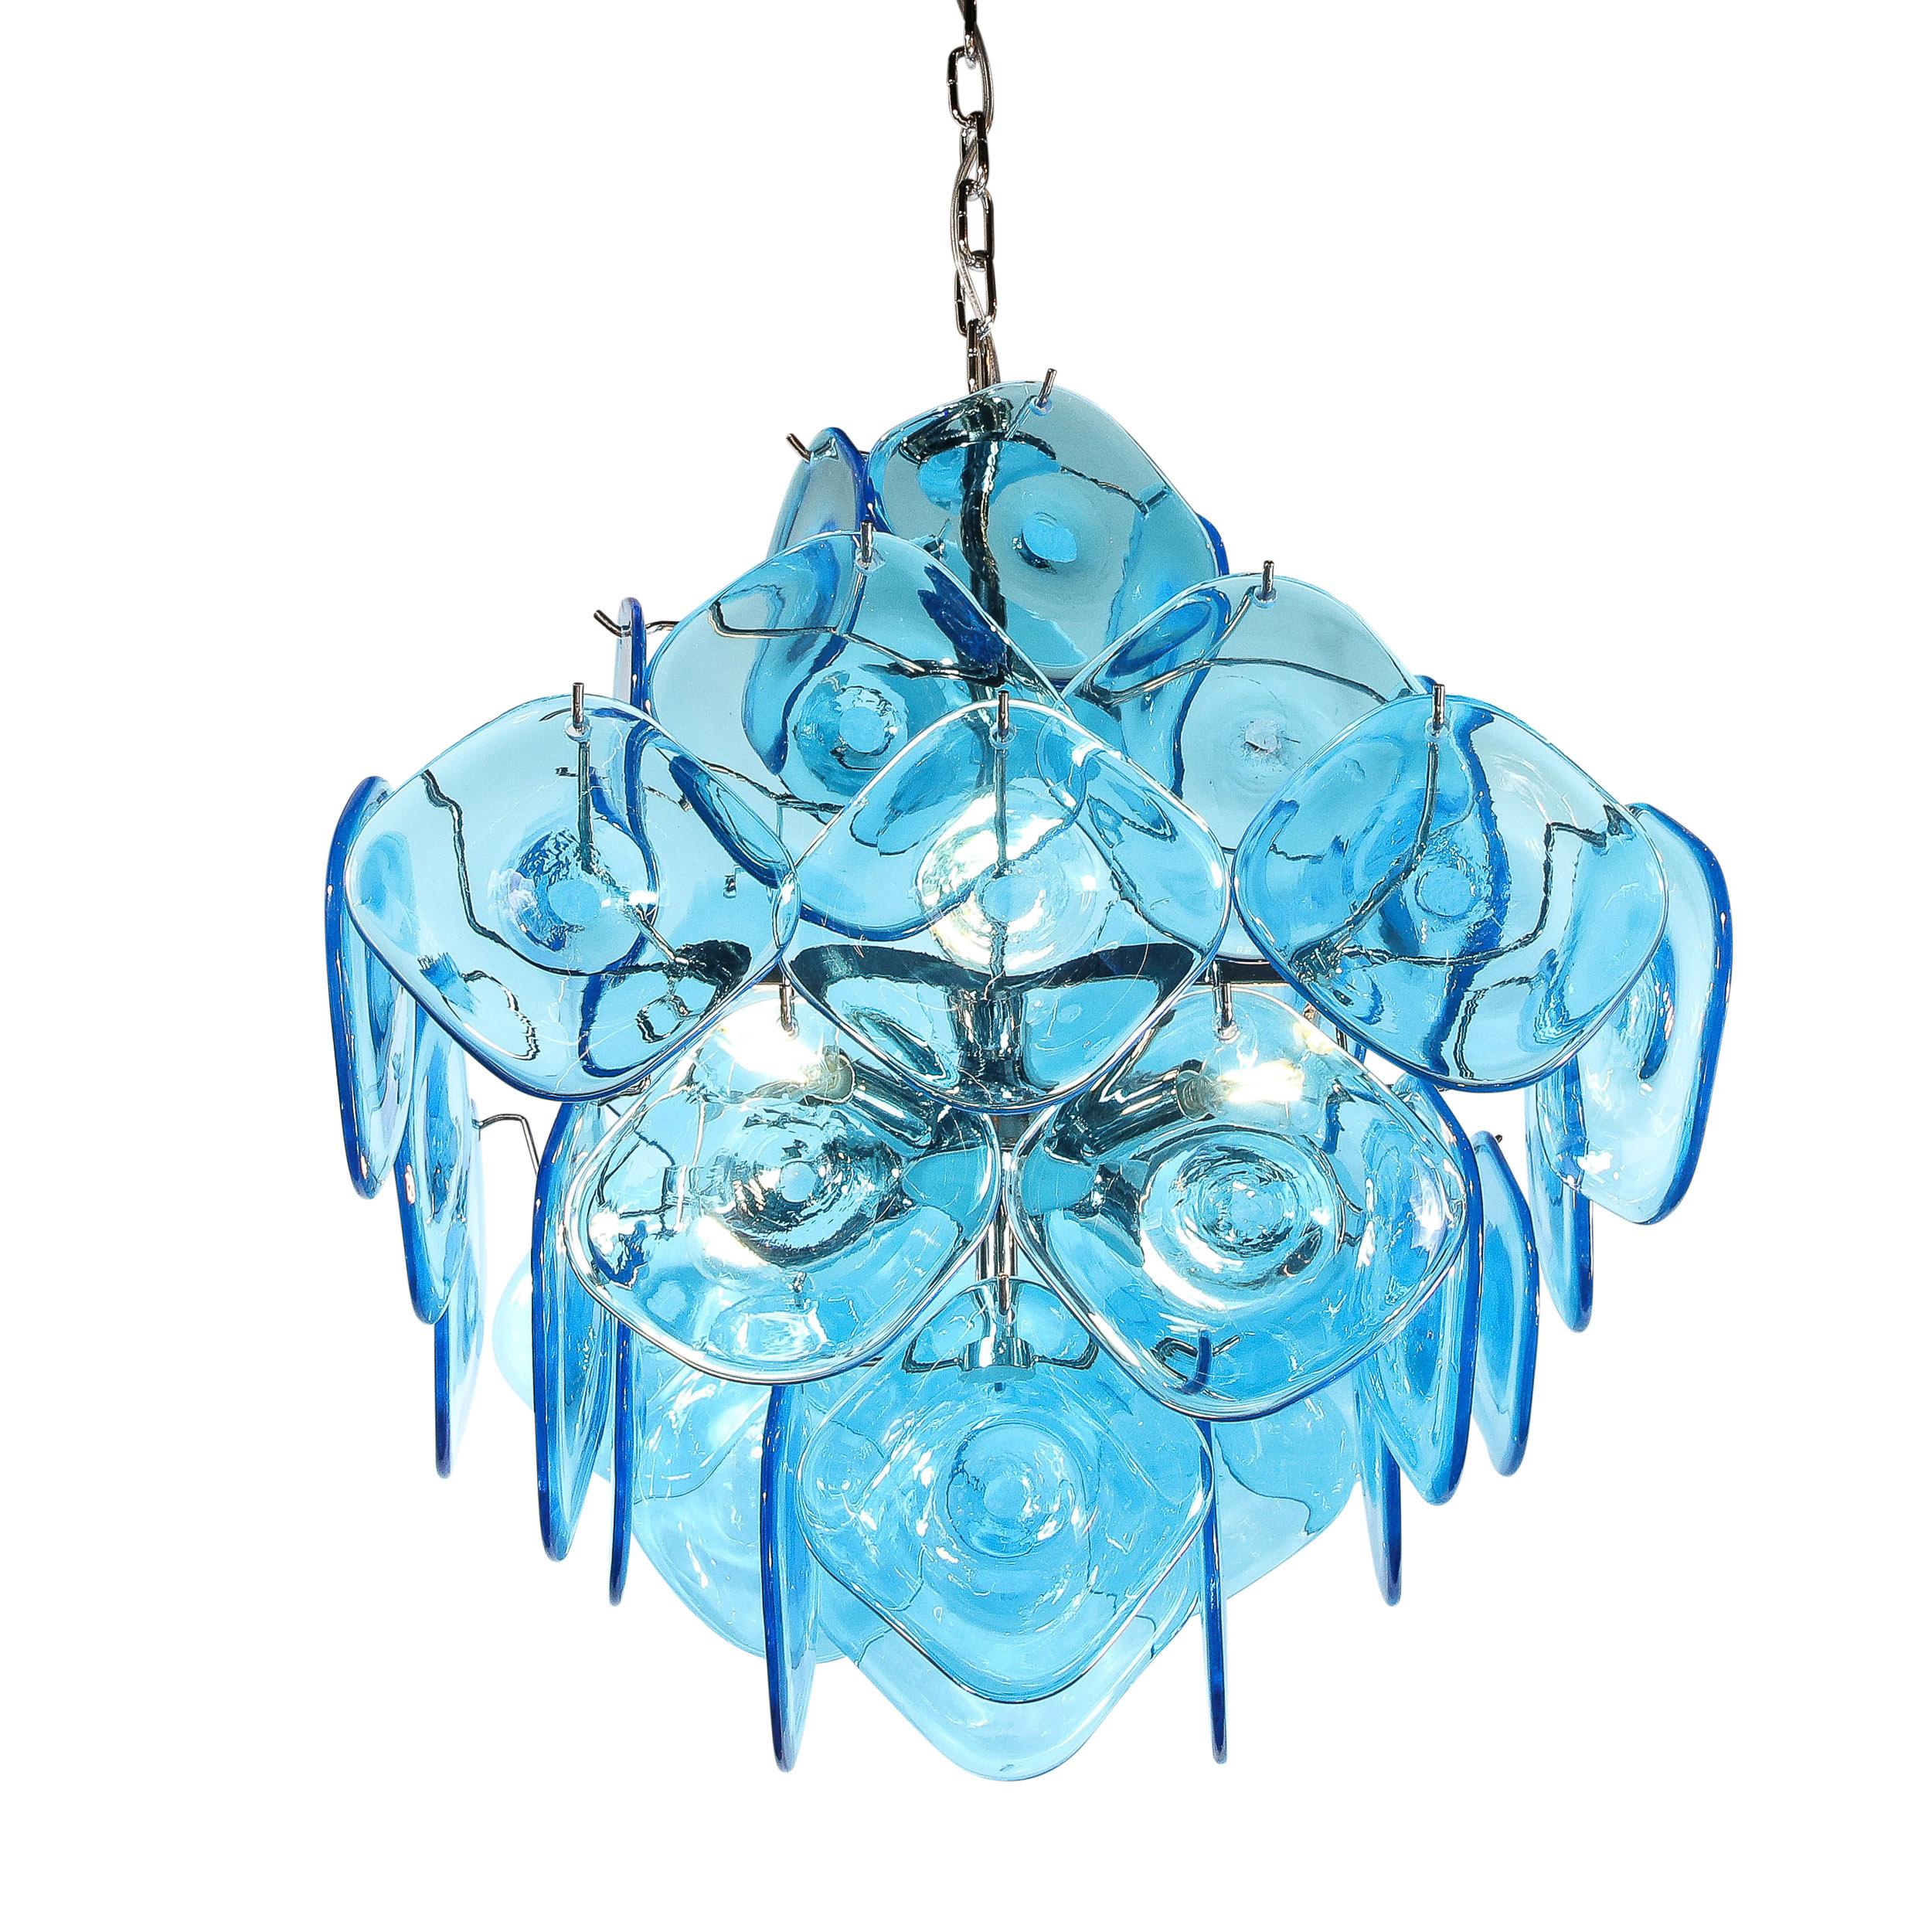 This Modernist Pagoda Form Hand-Blown Cerullean Blue Murano Glass Chandelier originates from Murano Italy during the latter half of the 20th century. Features of five tier pagoda framework from which hang beautiful rounded diamond shaped Hand Blown